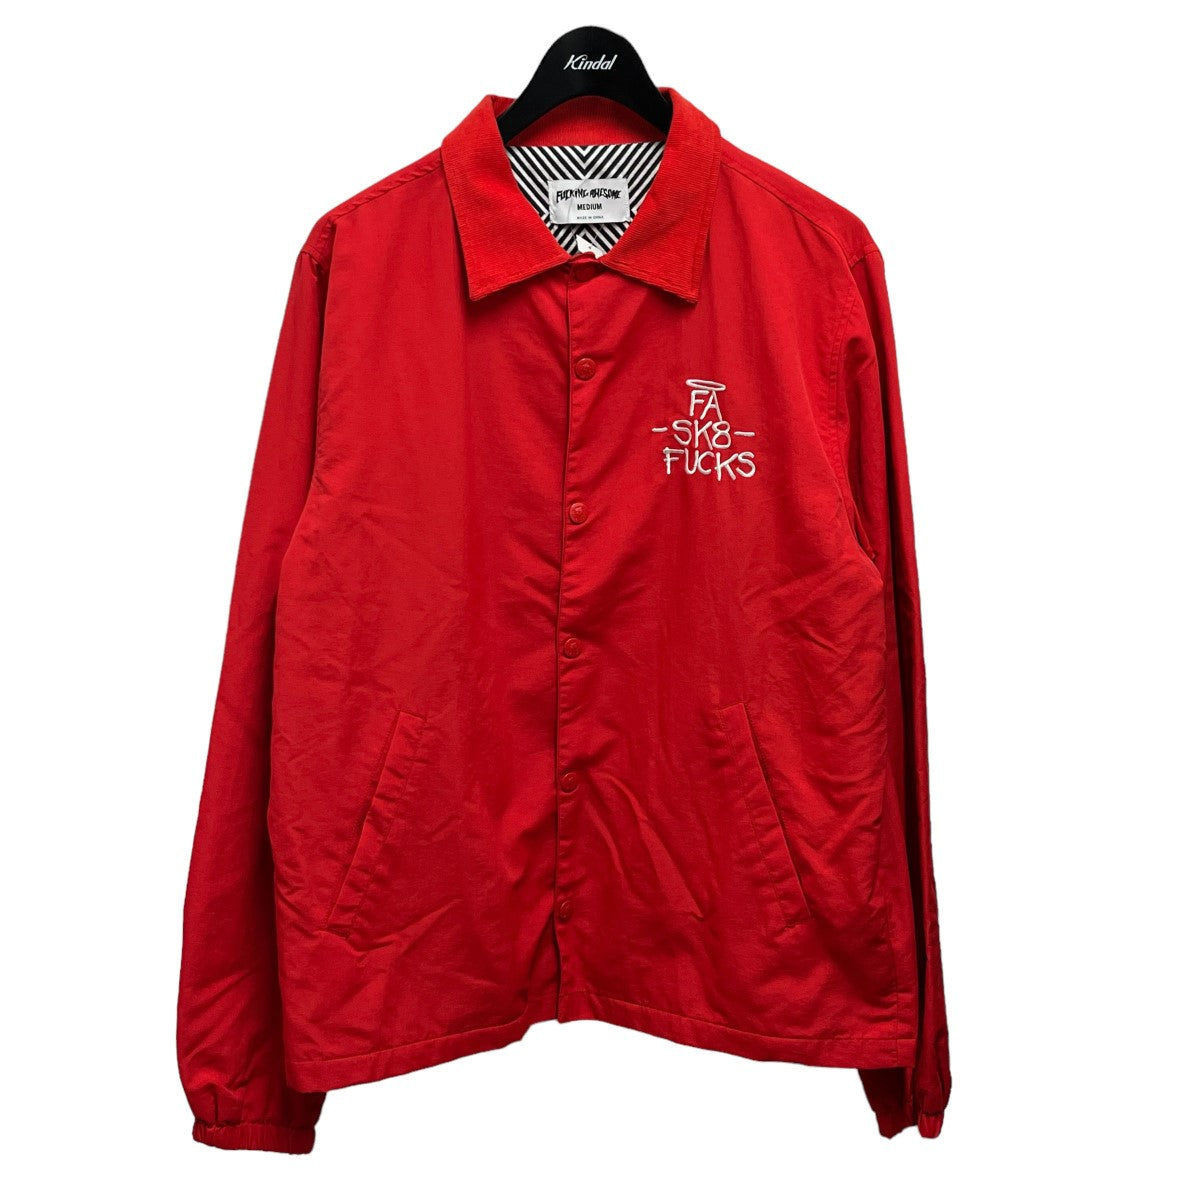 Fucking Awesome(ファッキングオーサム) Sk8 Fucks Coaches Jacket 